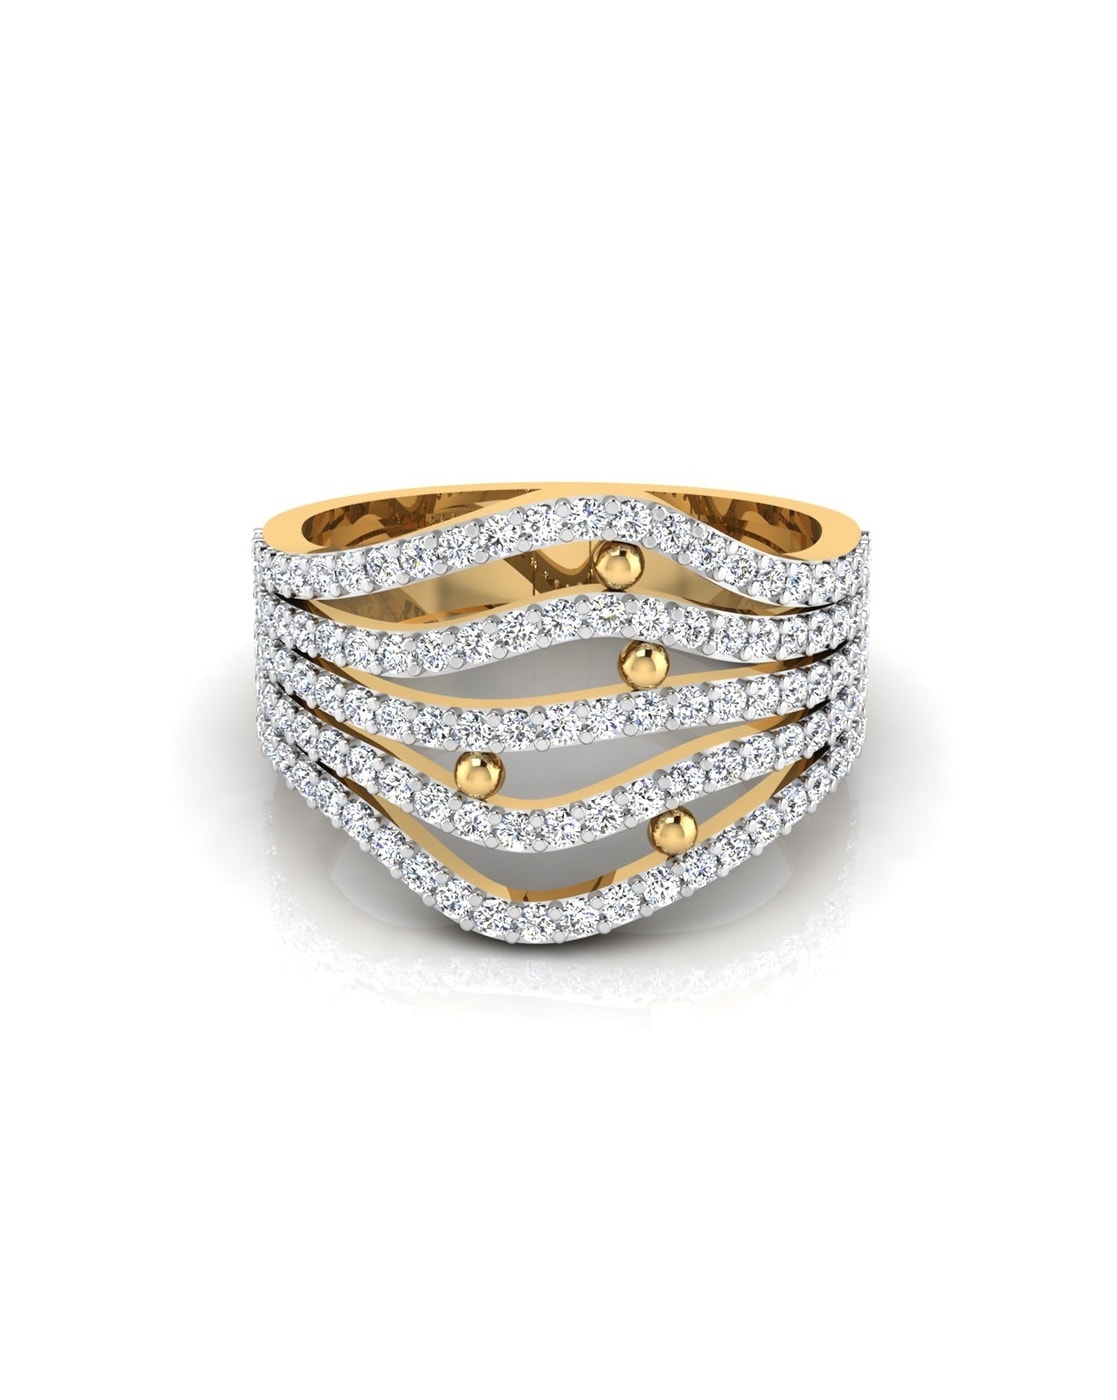 9 Cocktail rings ideas | gold ring designs, gold rings jewelry, gold  jewellery design